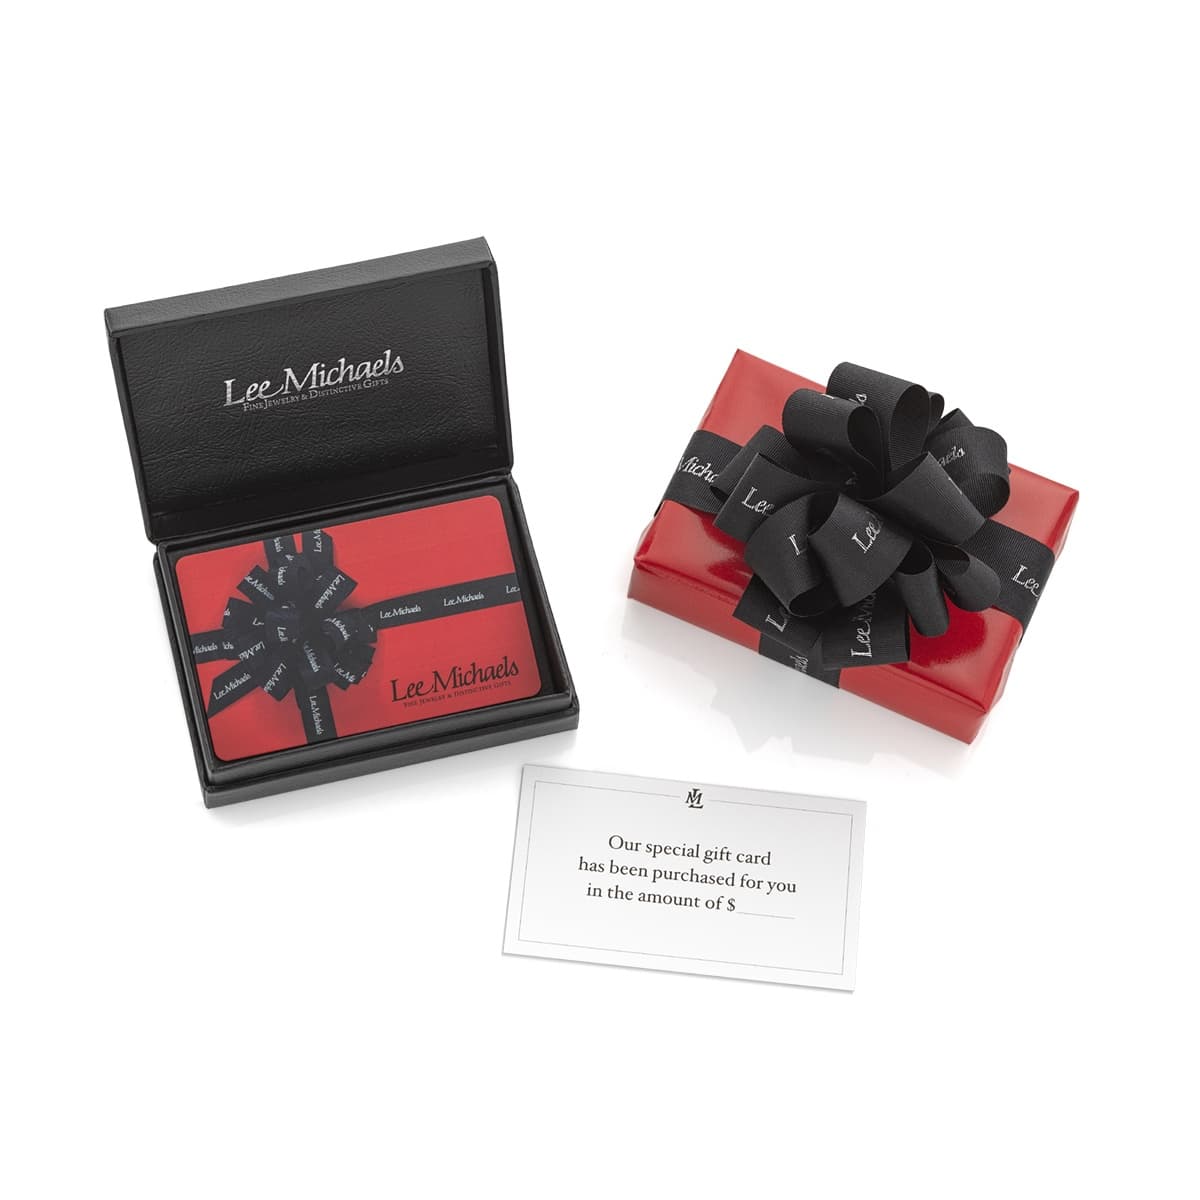 The Shops At La Cantera Gift Cards and Gift Certificate - 15900 La